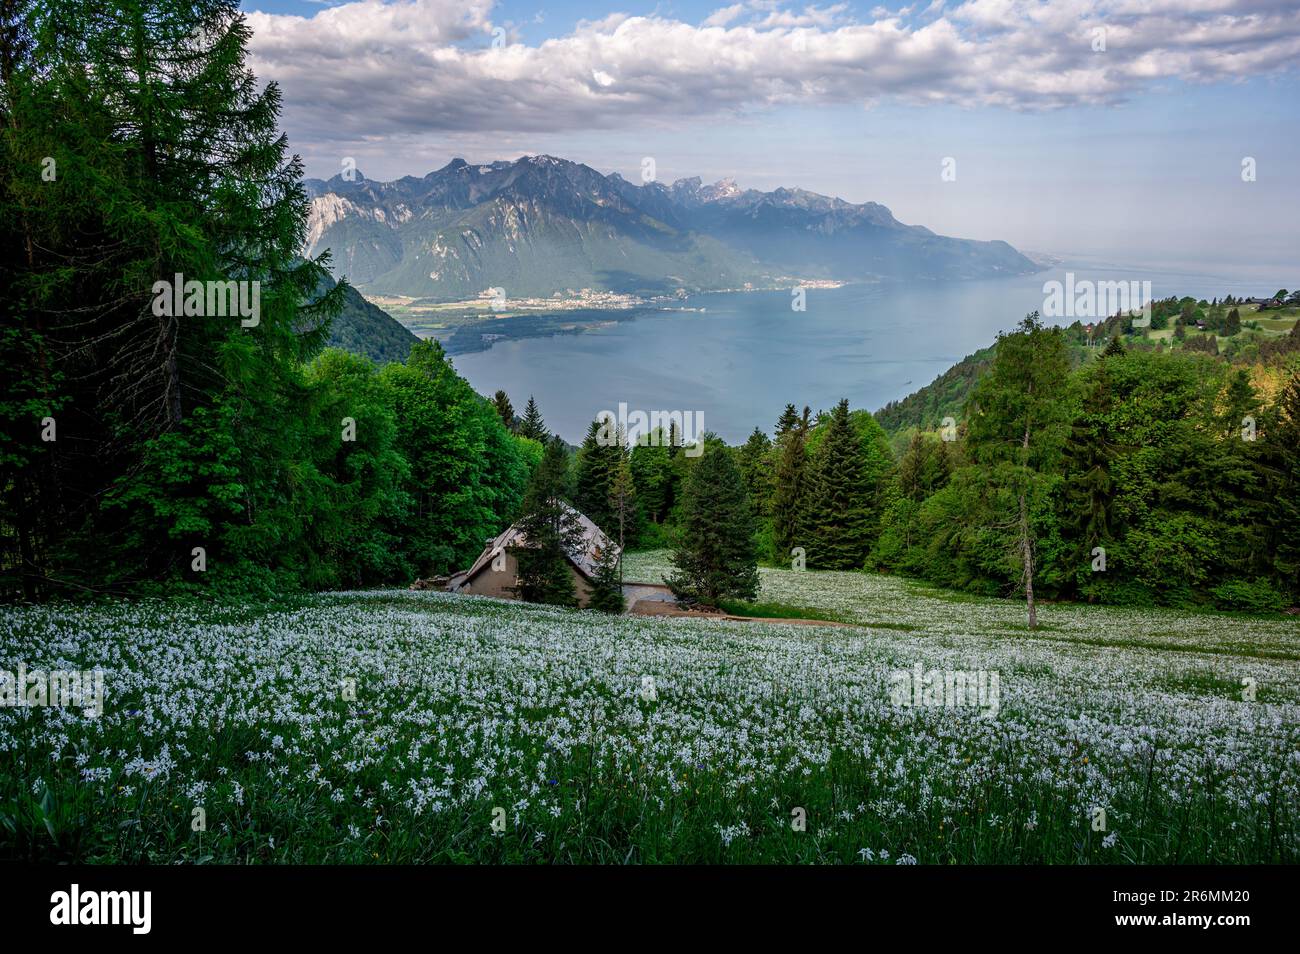 Landscape with mountains and sky. White Daffodils Blooming in spring. Narcissus poeticus. pheasant's eye. Montreux, Caux, Vaud, Switzerland. Stock Photo